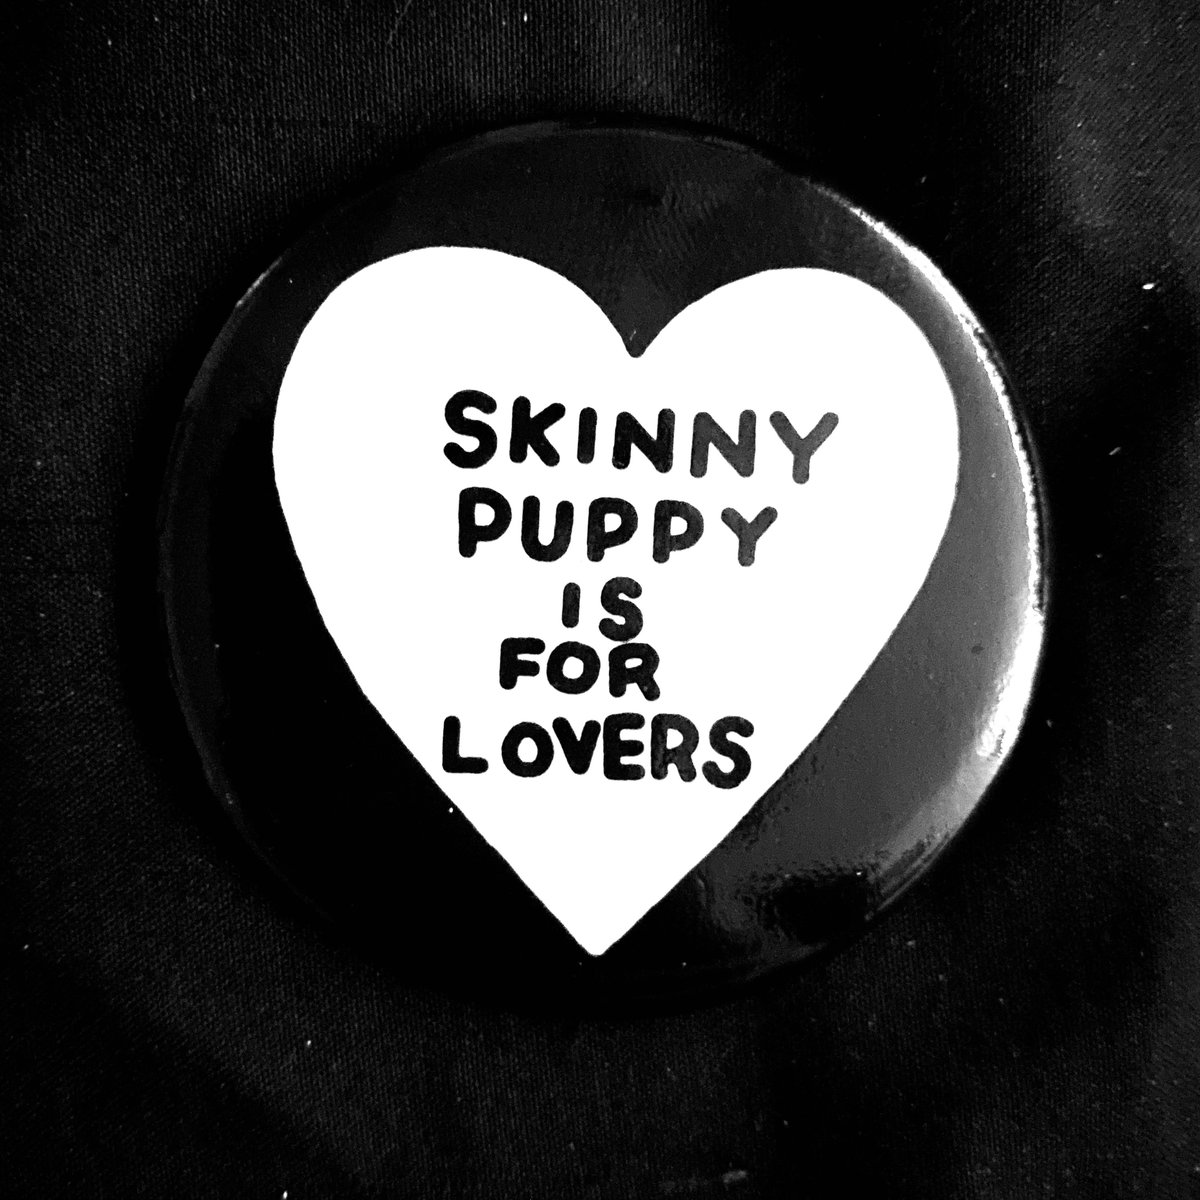 skinny puppy is for lovers 2.25" button / bad vibes by matt darling